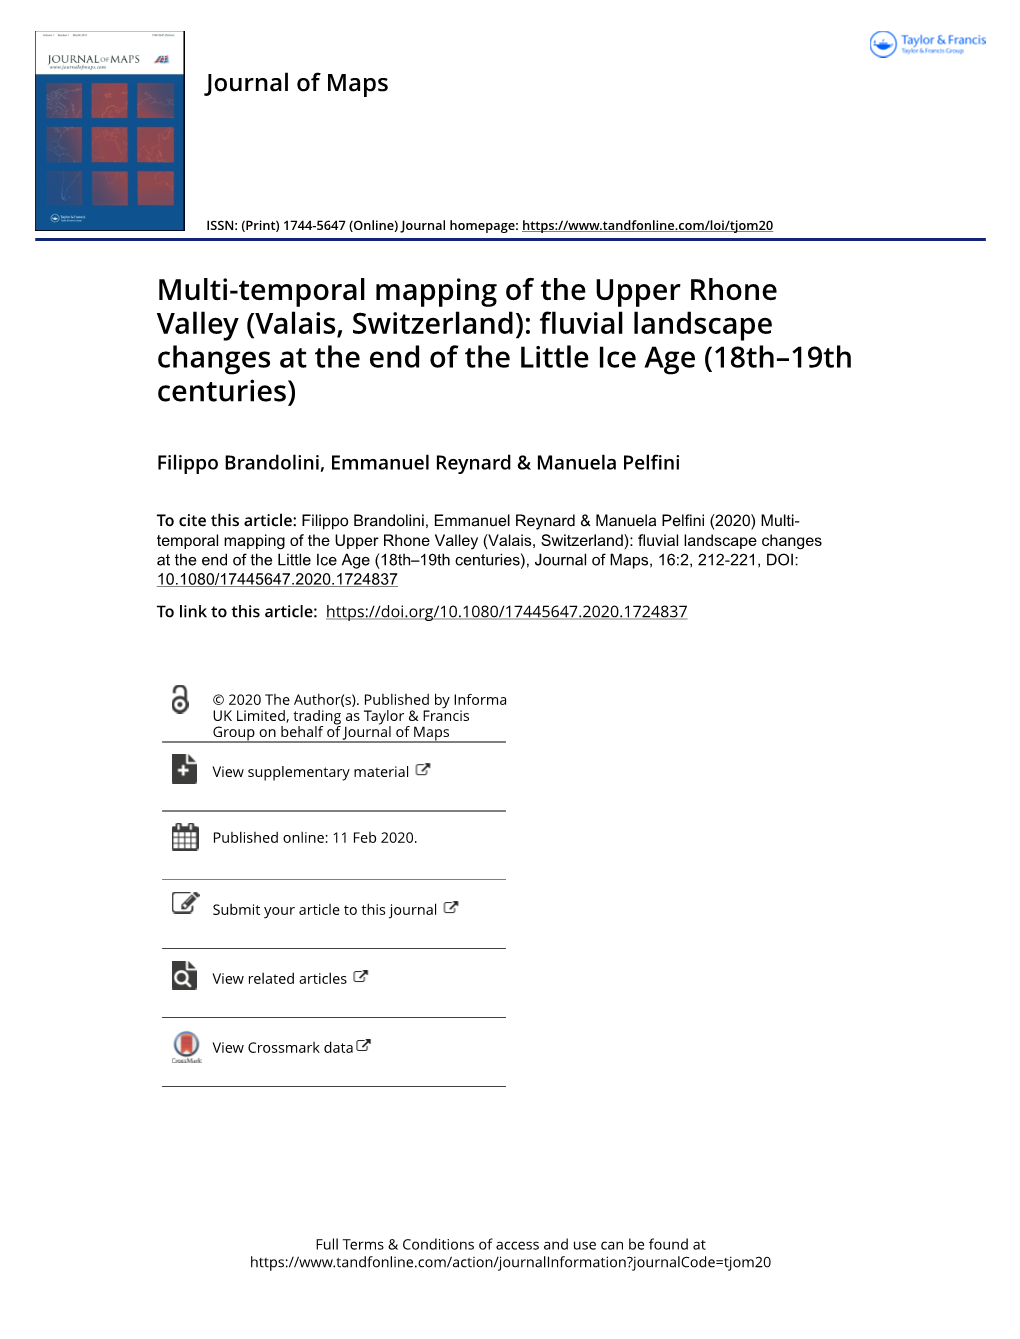 Multi-Temporal Mapping of the Upper Rhone Valley (Valais, Switzerland): Fluvial Landscape Changes at the End of the Little Ice Age (18Th–19Th Centuries)